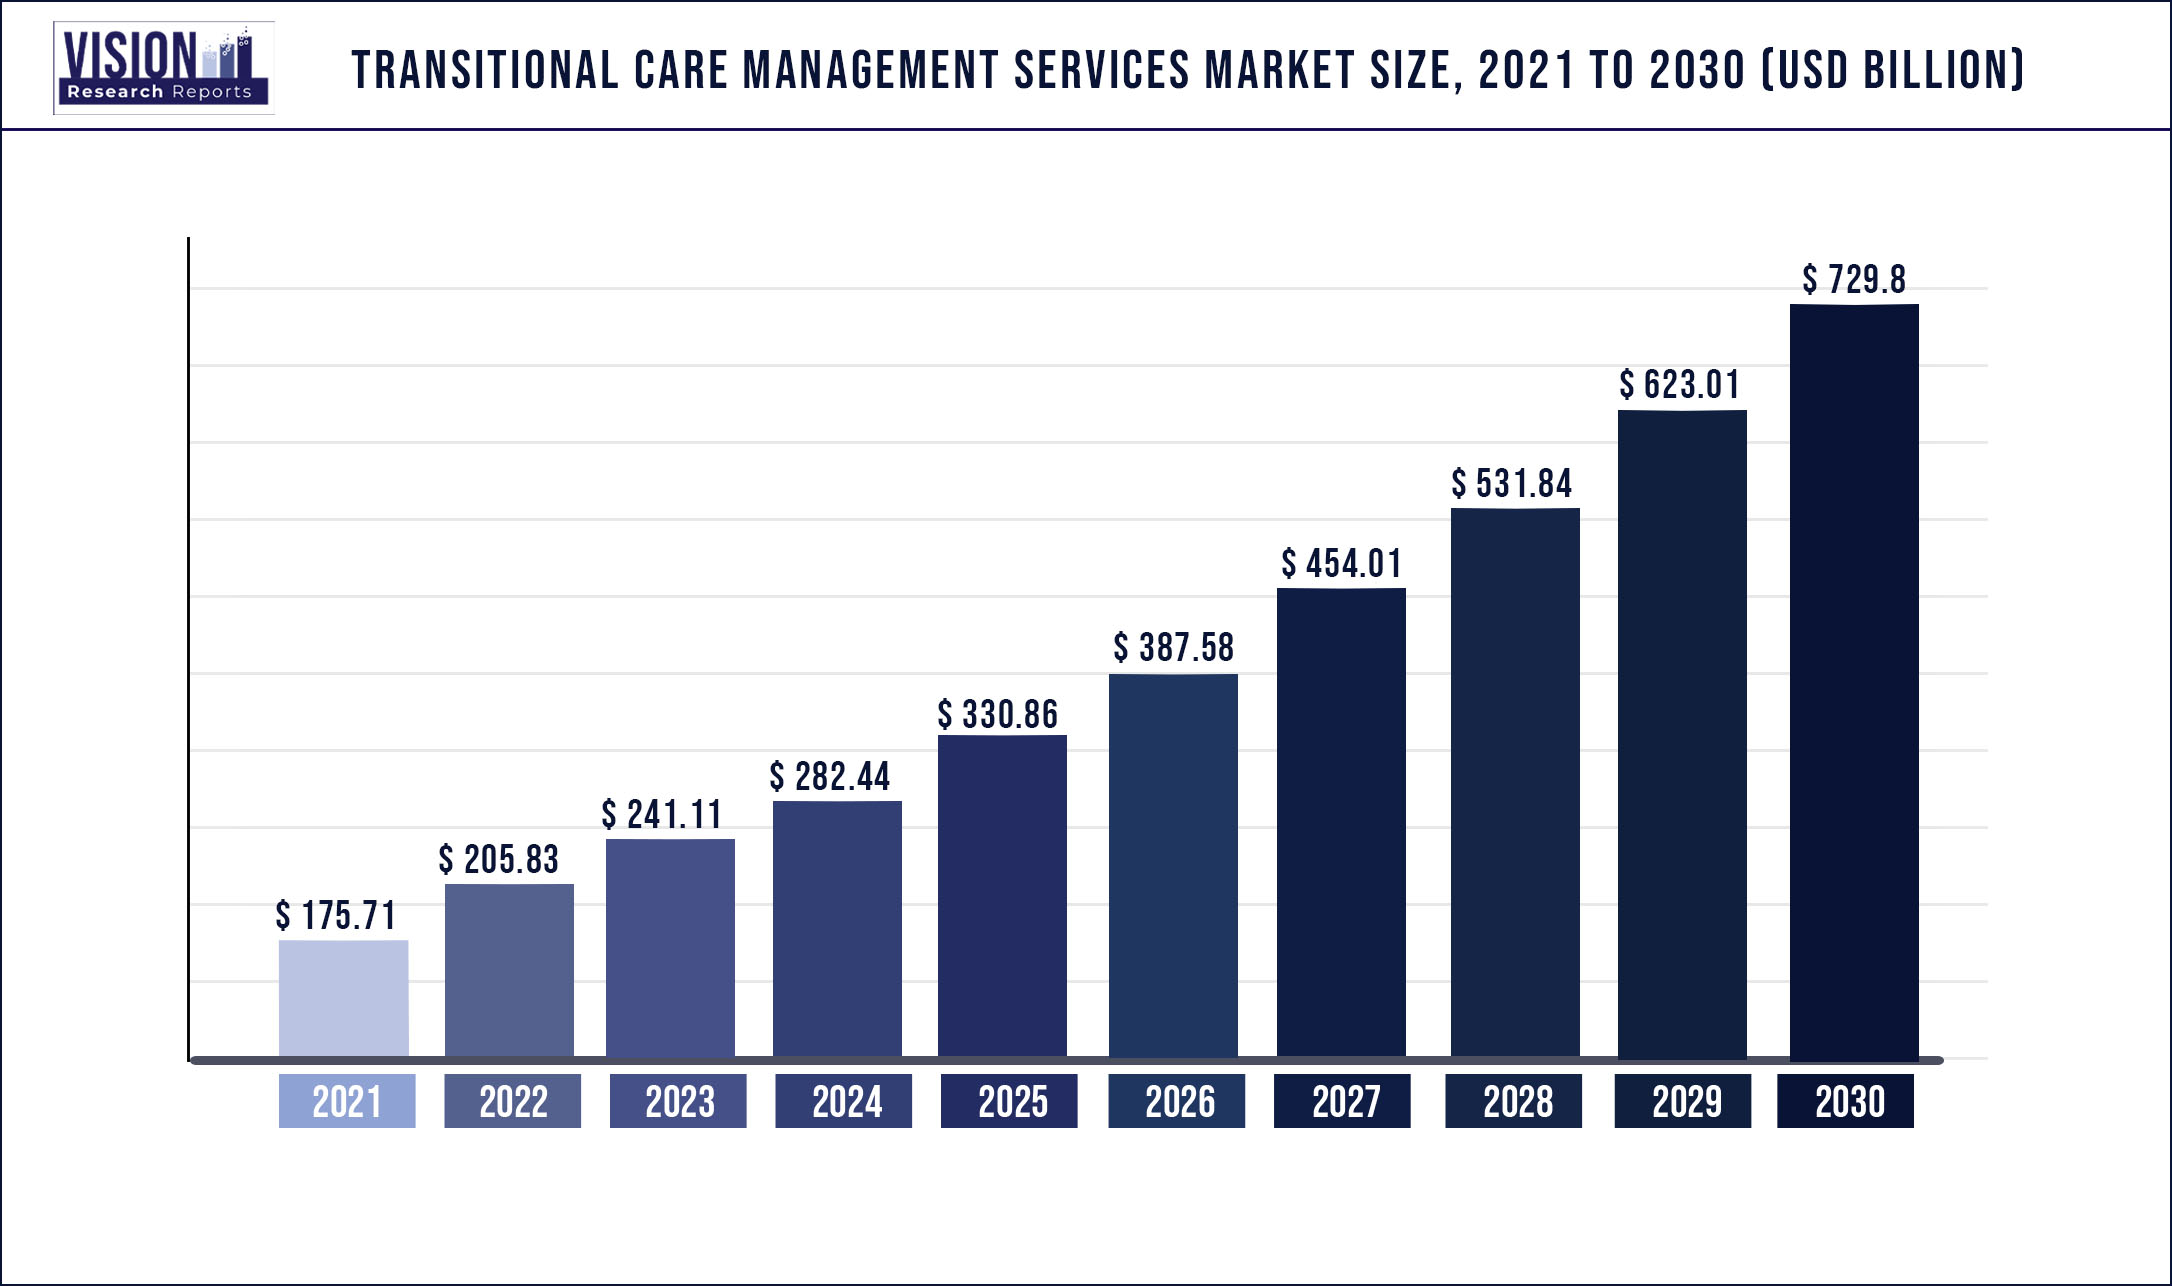 Transitional Care Management Services Market Size 2021 to 2030